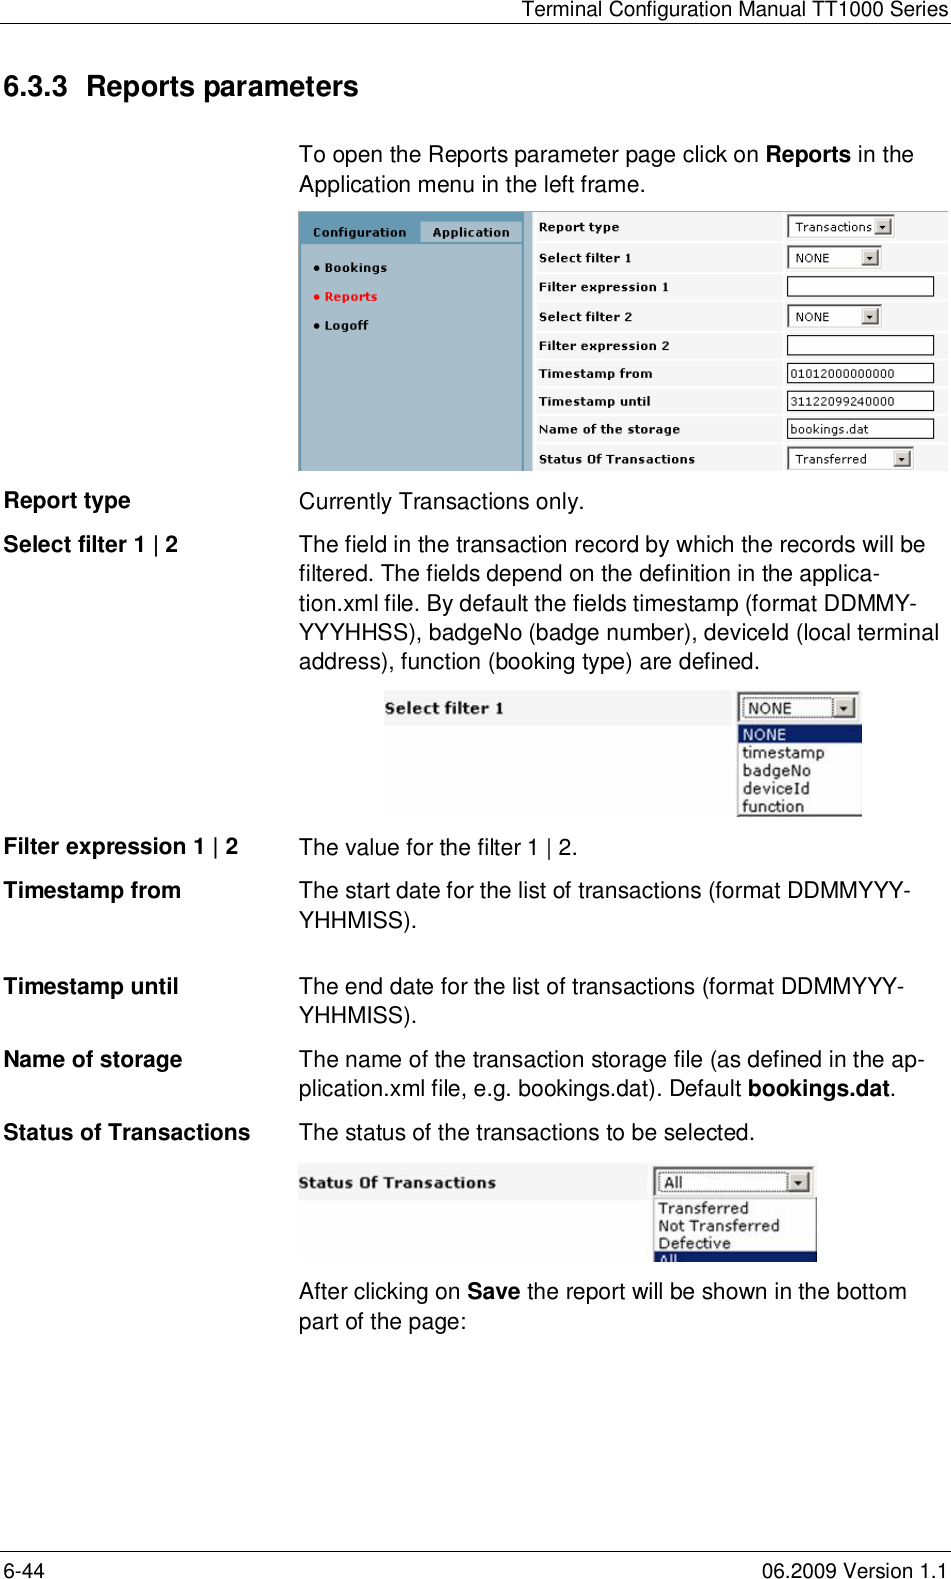 Terminal Configuration Manual TT1000 Series6-44 06.2009 Version 1.16.3.3  Reports parametersTo open the Reports parameter page click on Reports in theApplication menu in the left frame.Report type Currently Transactions only.Select filter 1 | 2 The field in the transaction record by which the records will befiltered. The fields depend on the definition in the applica-tion.xml file. By default the fields timestamp (format DDMMY-YYYHHSS), badgeNo (badge number), deviceId (local terminaladdress), function (booking type) are defined.Filter expression 1 | 2 The value for the filter 1 | 2.Timestamp from The start date for the list of transactions (format DDMMYYY-YHHMISS).Timestamp until The end date for the list of transactions (format DDMMYYY-YHHMISS).Name of storage The name of the transaction storage file (as defined in the ap-plication.xml file, e.g. bookings.dat). Default bookings.dat.Status of Transactions The status of the transactions to be selected.After clicking on Save the report will be shown in the bottompart of the page: